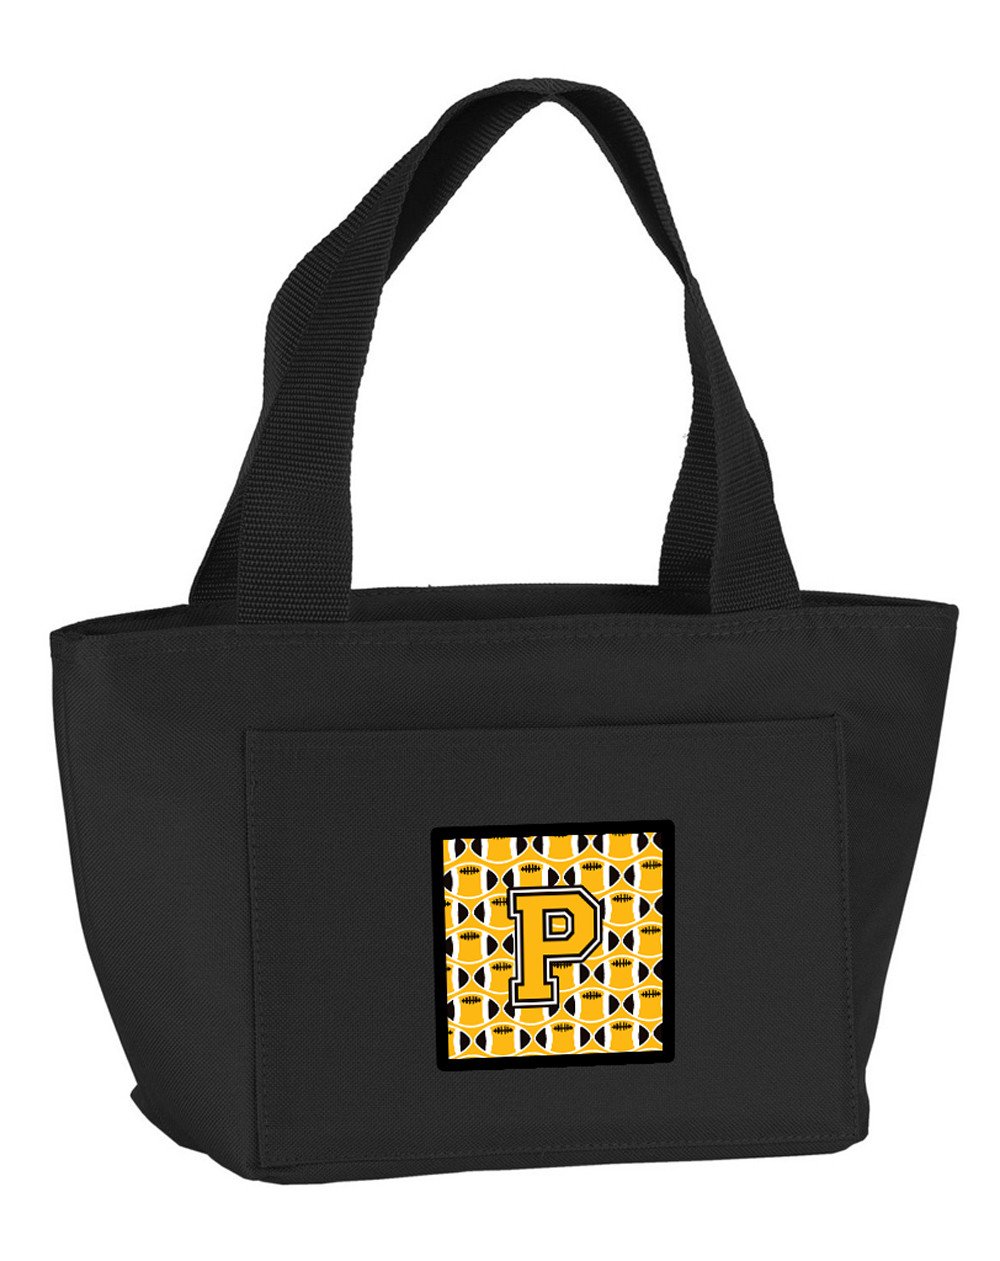 Letter P Football Black, Old Gold and White Lunch Bag CJ1080-PBK-8808 by Caroline's Treasures